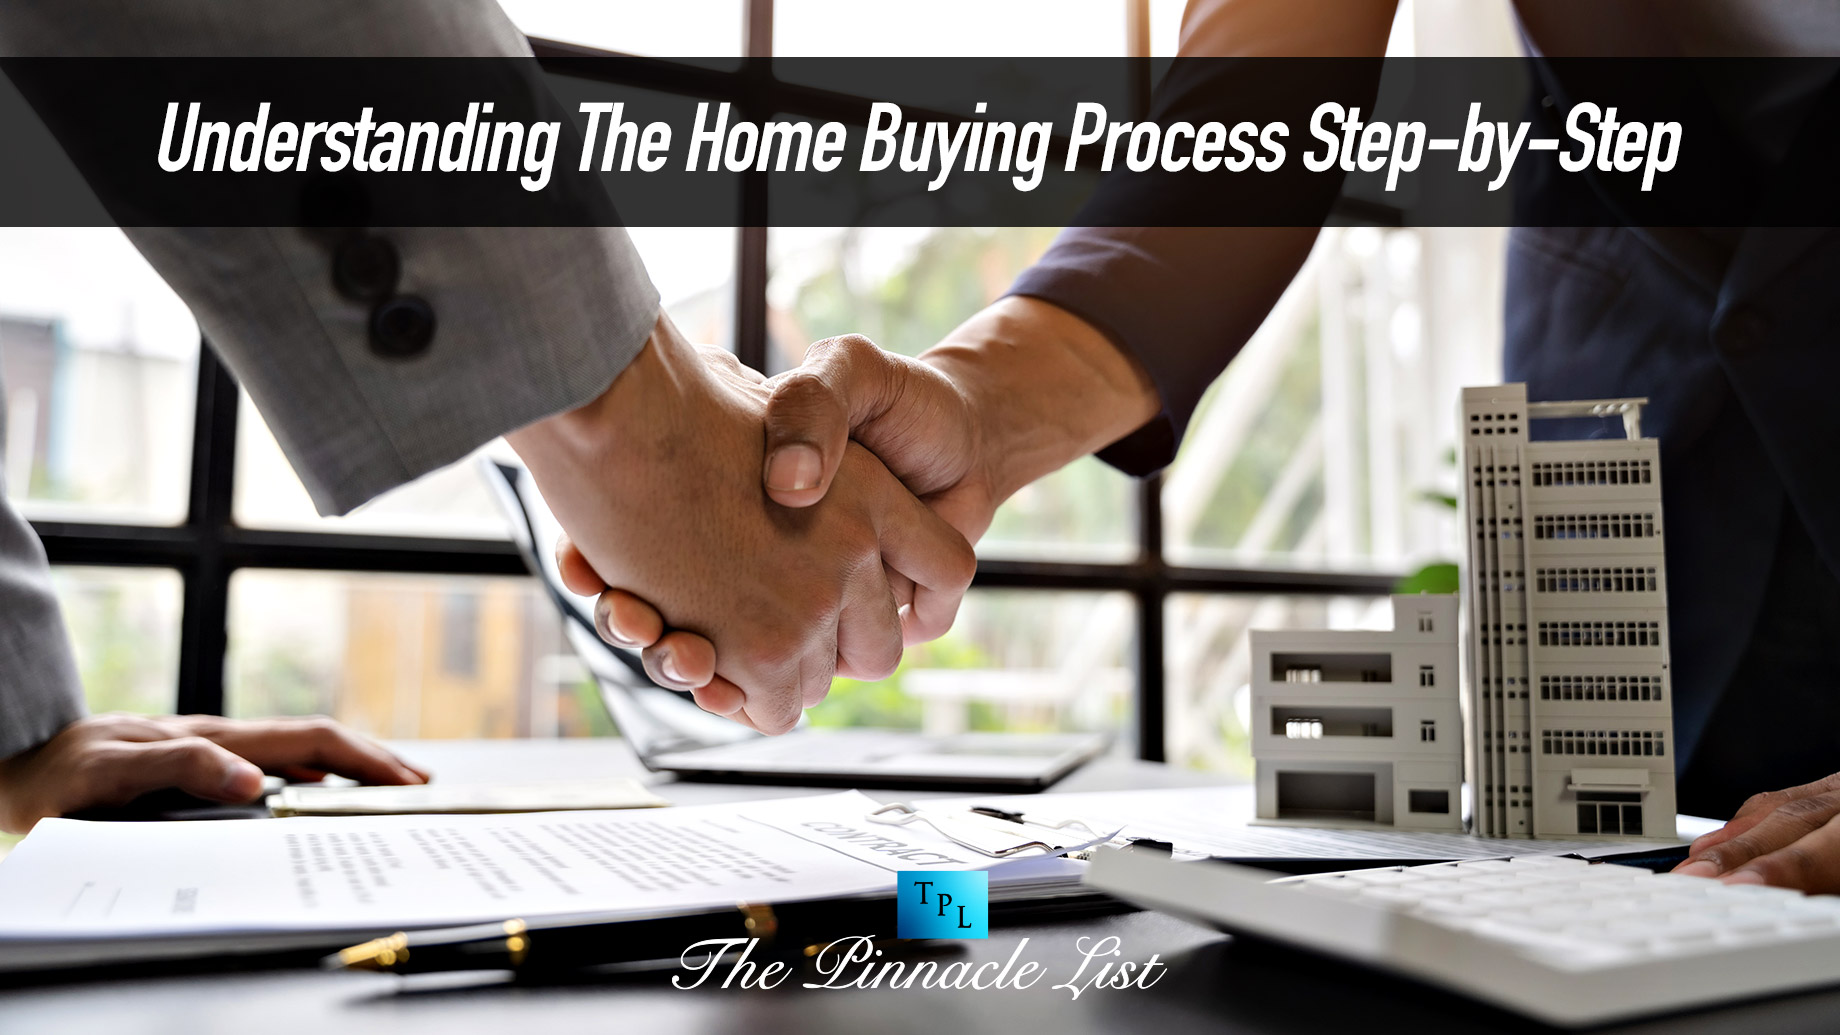 Understanding The Home Buying Process Step-by-Step